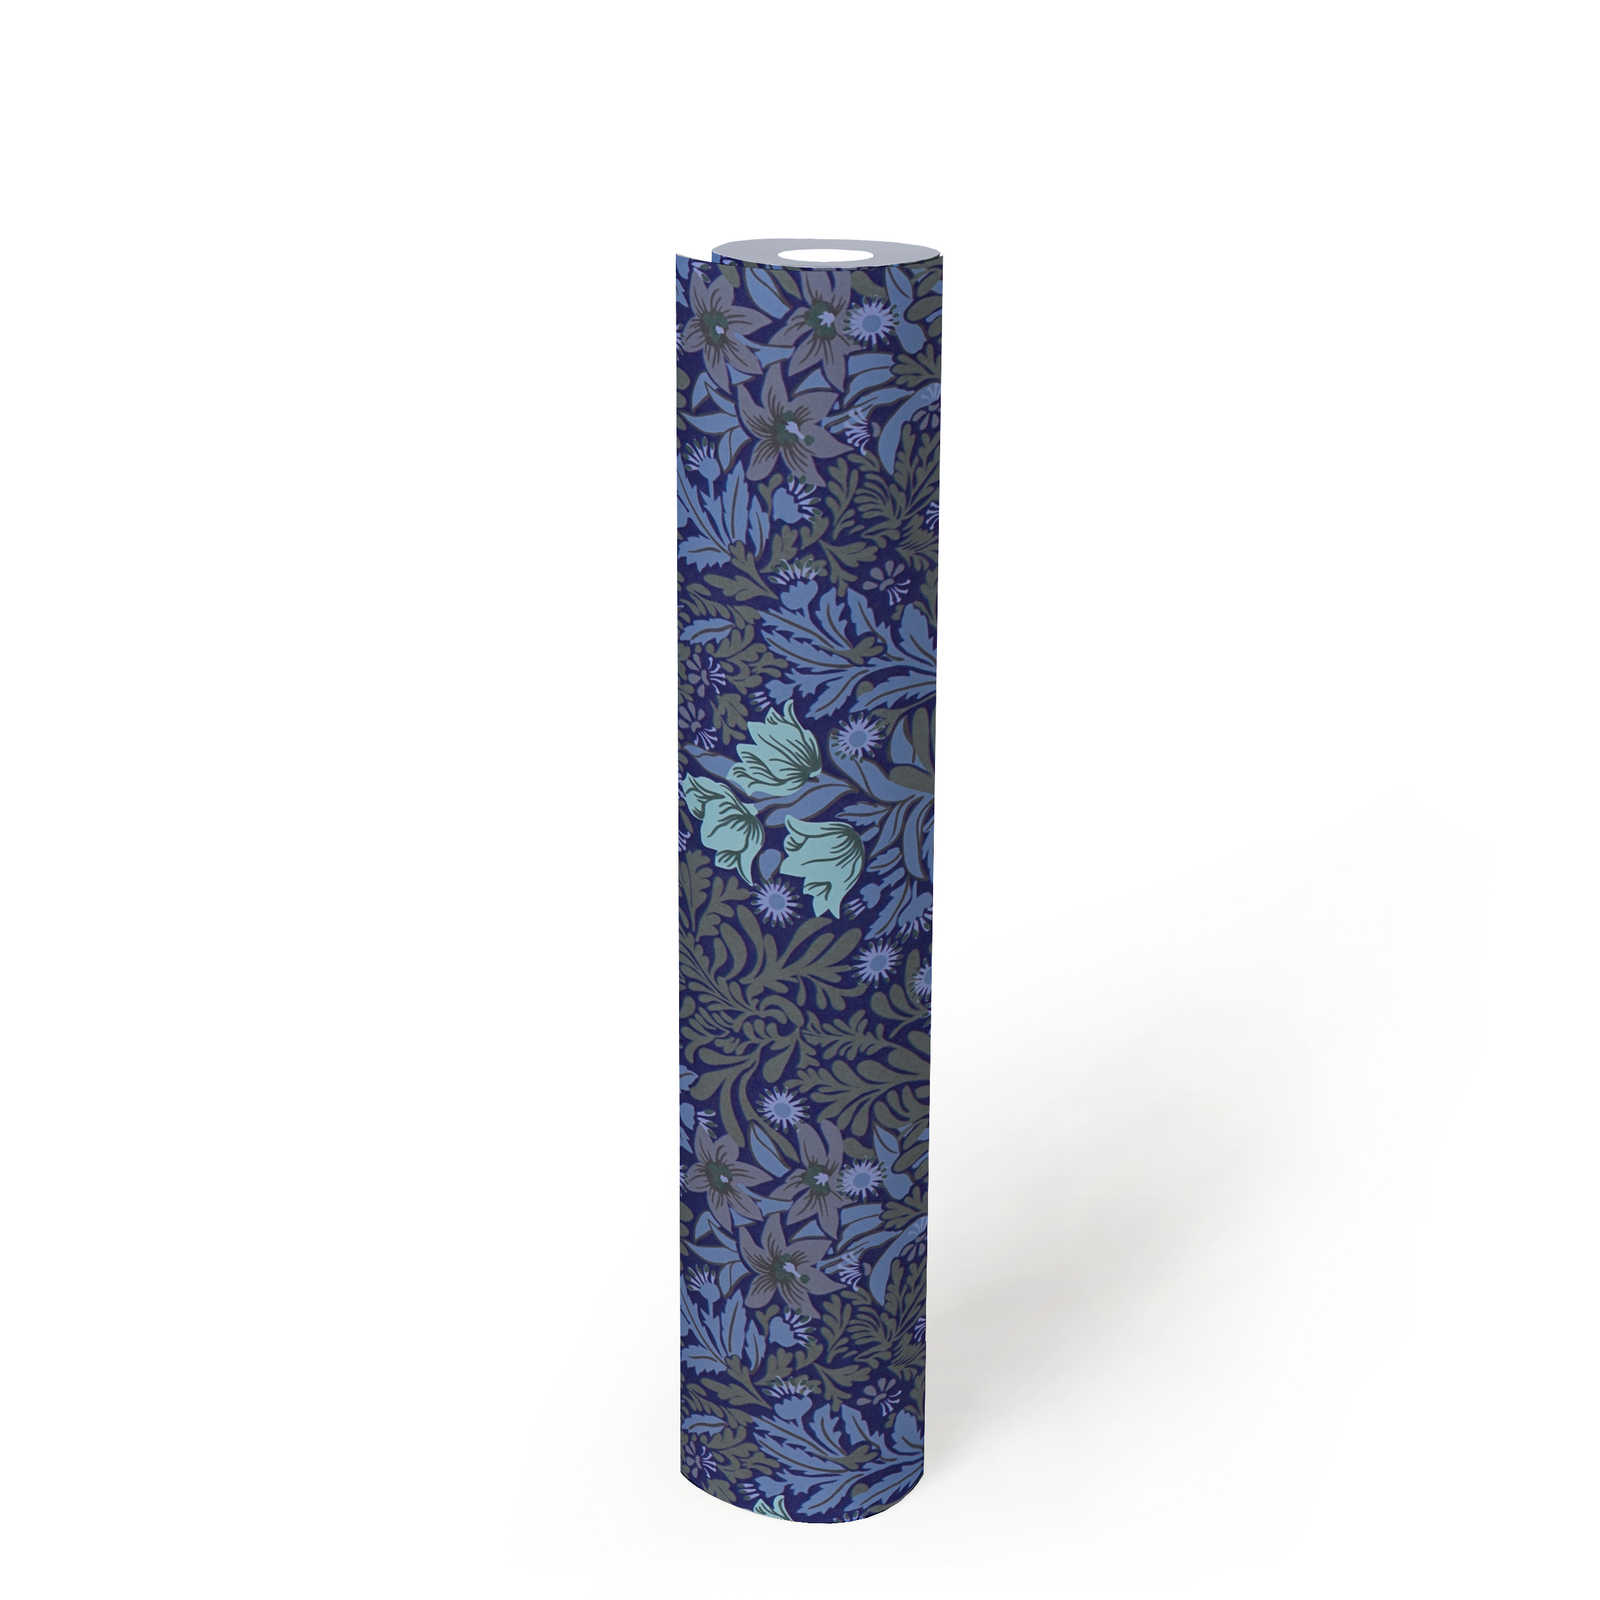             Floral non-woven wallpaper with leaf tendrils and flowers - blue, grey, green
        